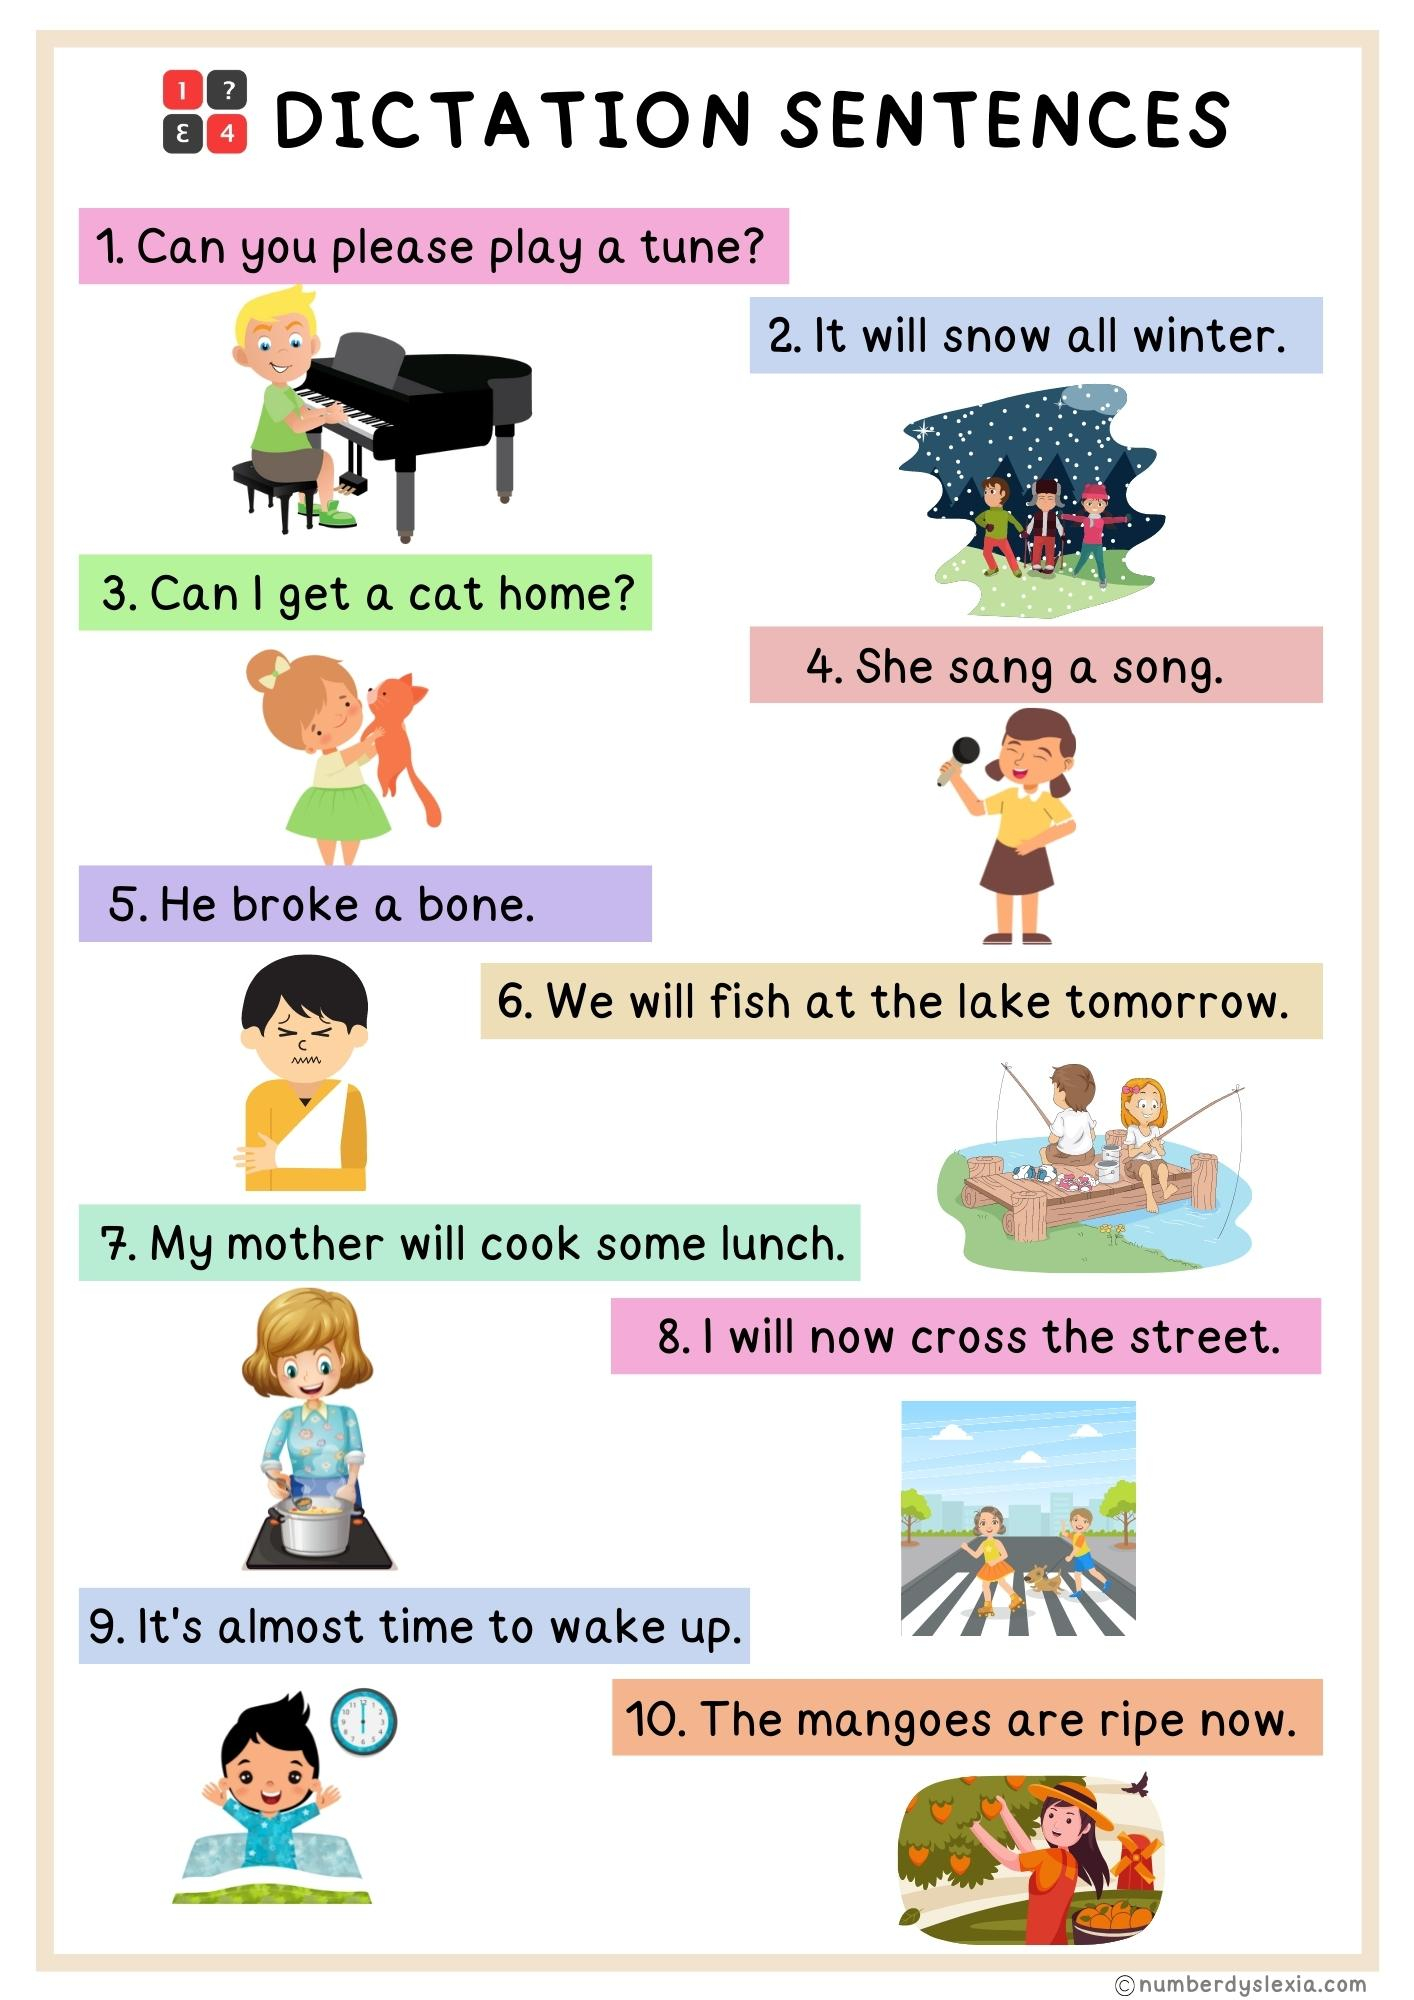 10 Dictation Sentences For Kindergarteners PDF Included Number Dyslexia